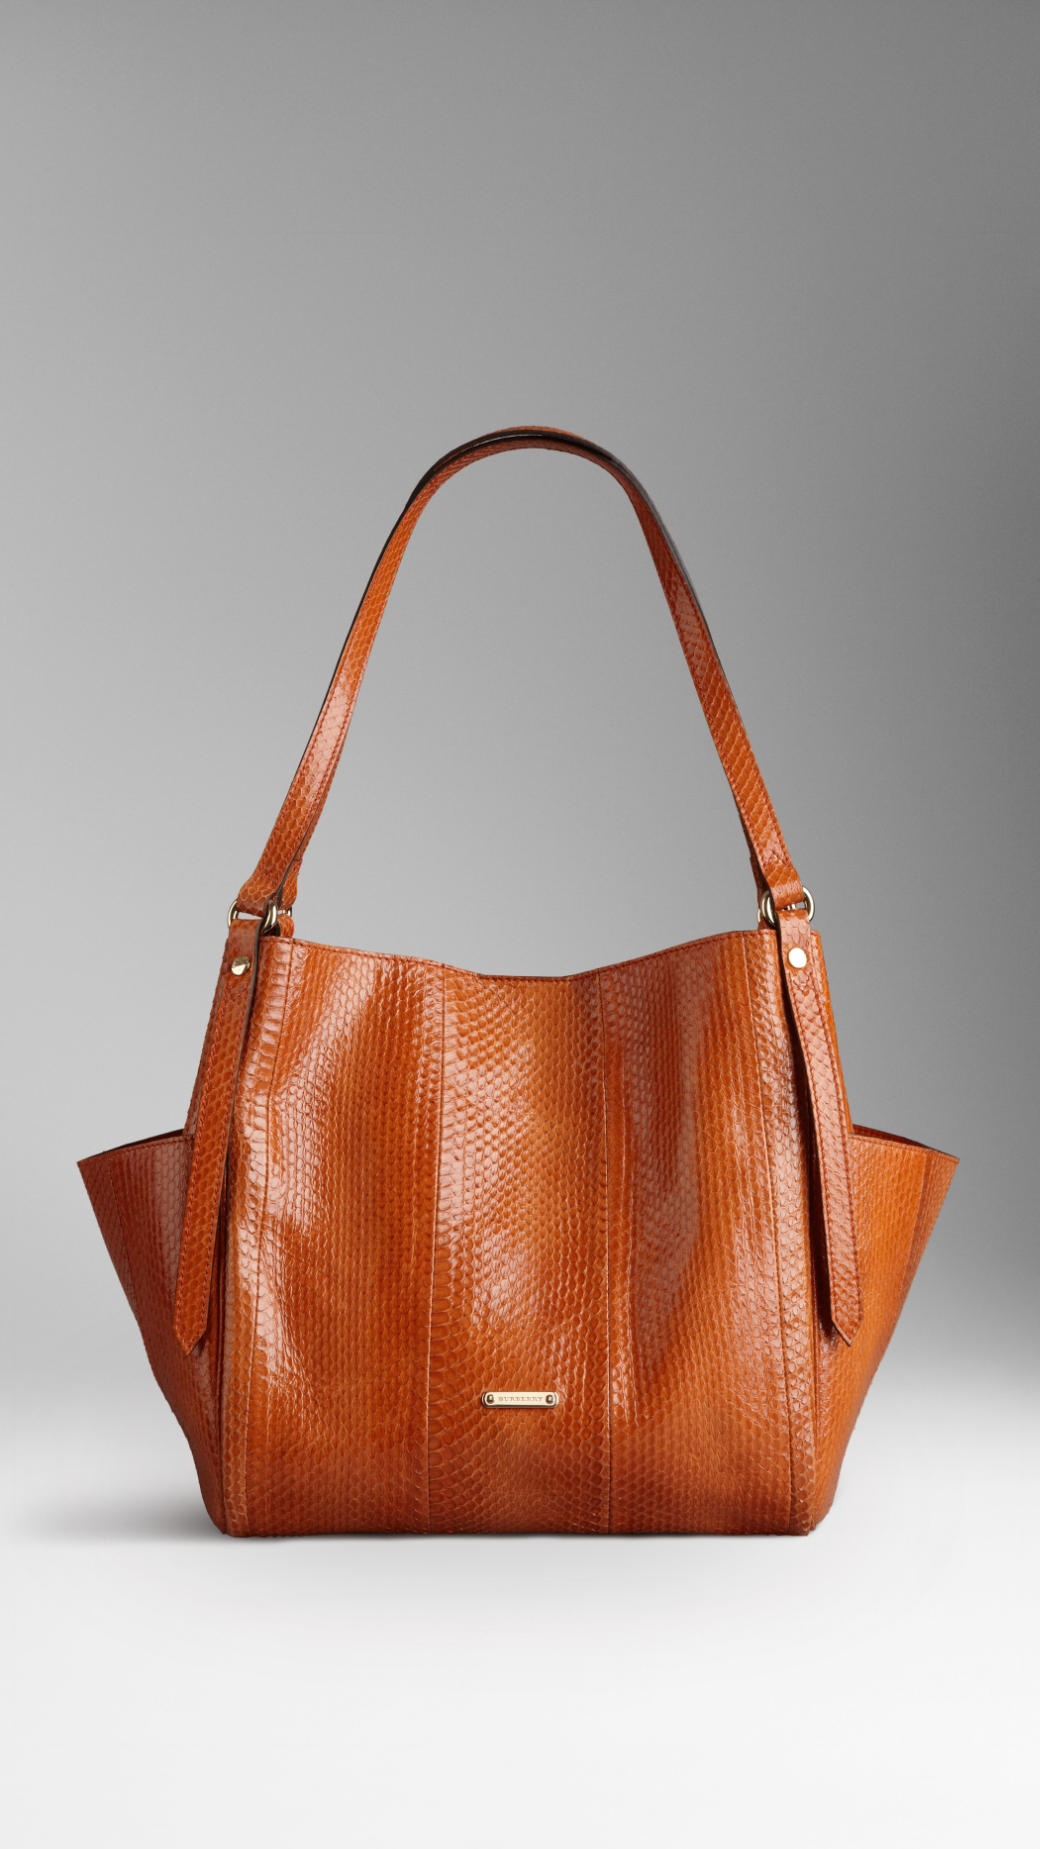 Lyst - Burberry Small Snakeskin Tote Bag in Brown